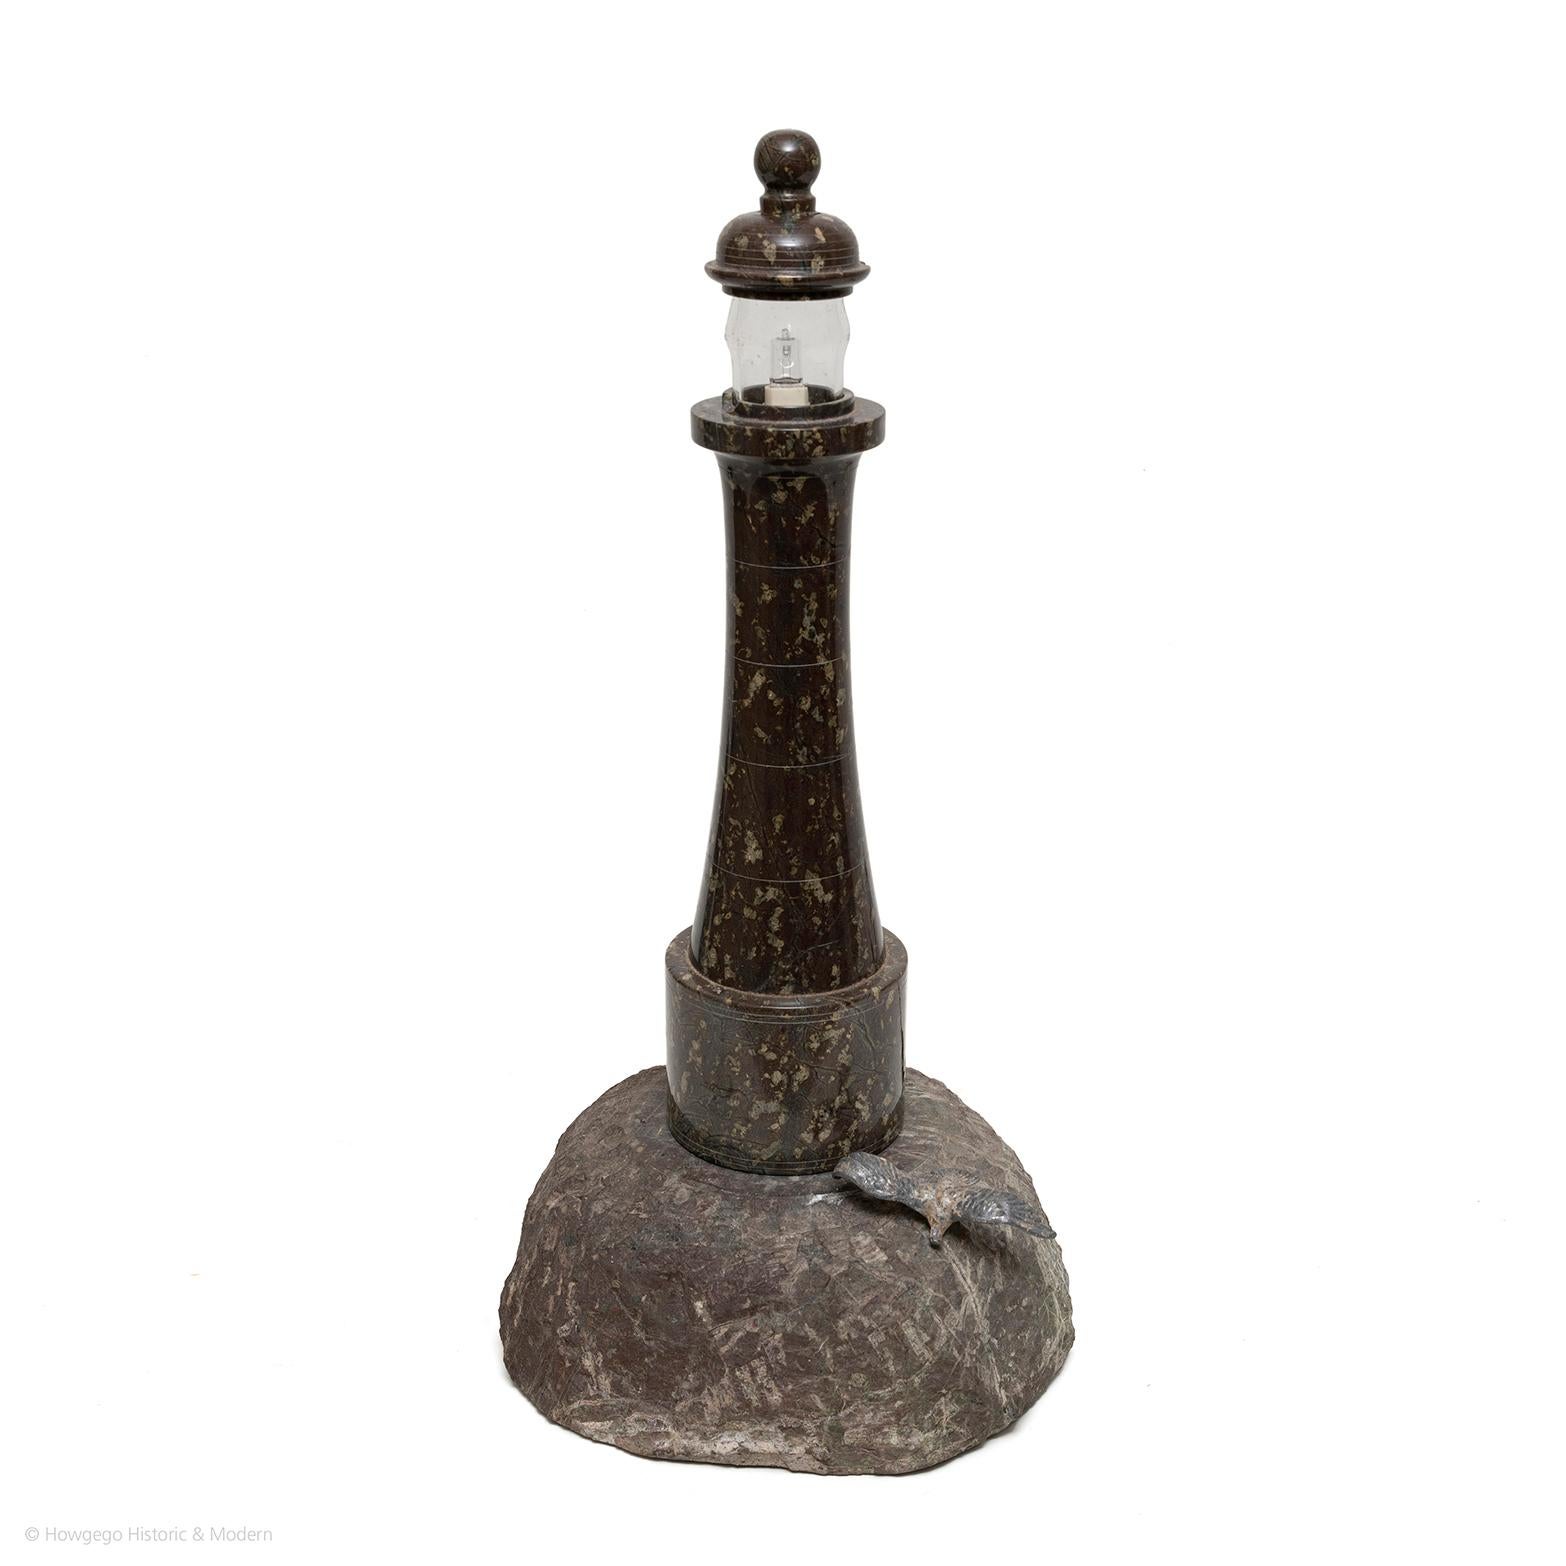 Appealing to the nautical or seaside enthusiast
Characterful table lamp bringing the spirit of the sea into the interior, would be atmospheric in a seaside home.

A large Cornish turned serpentine granite lighthouse lamp made from local stone.